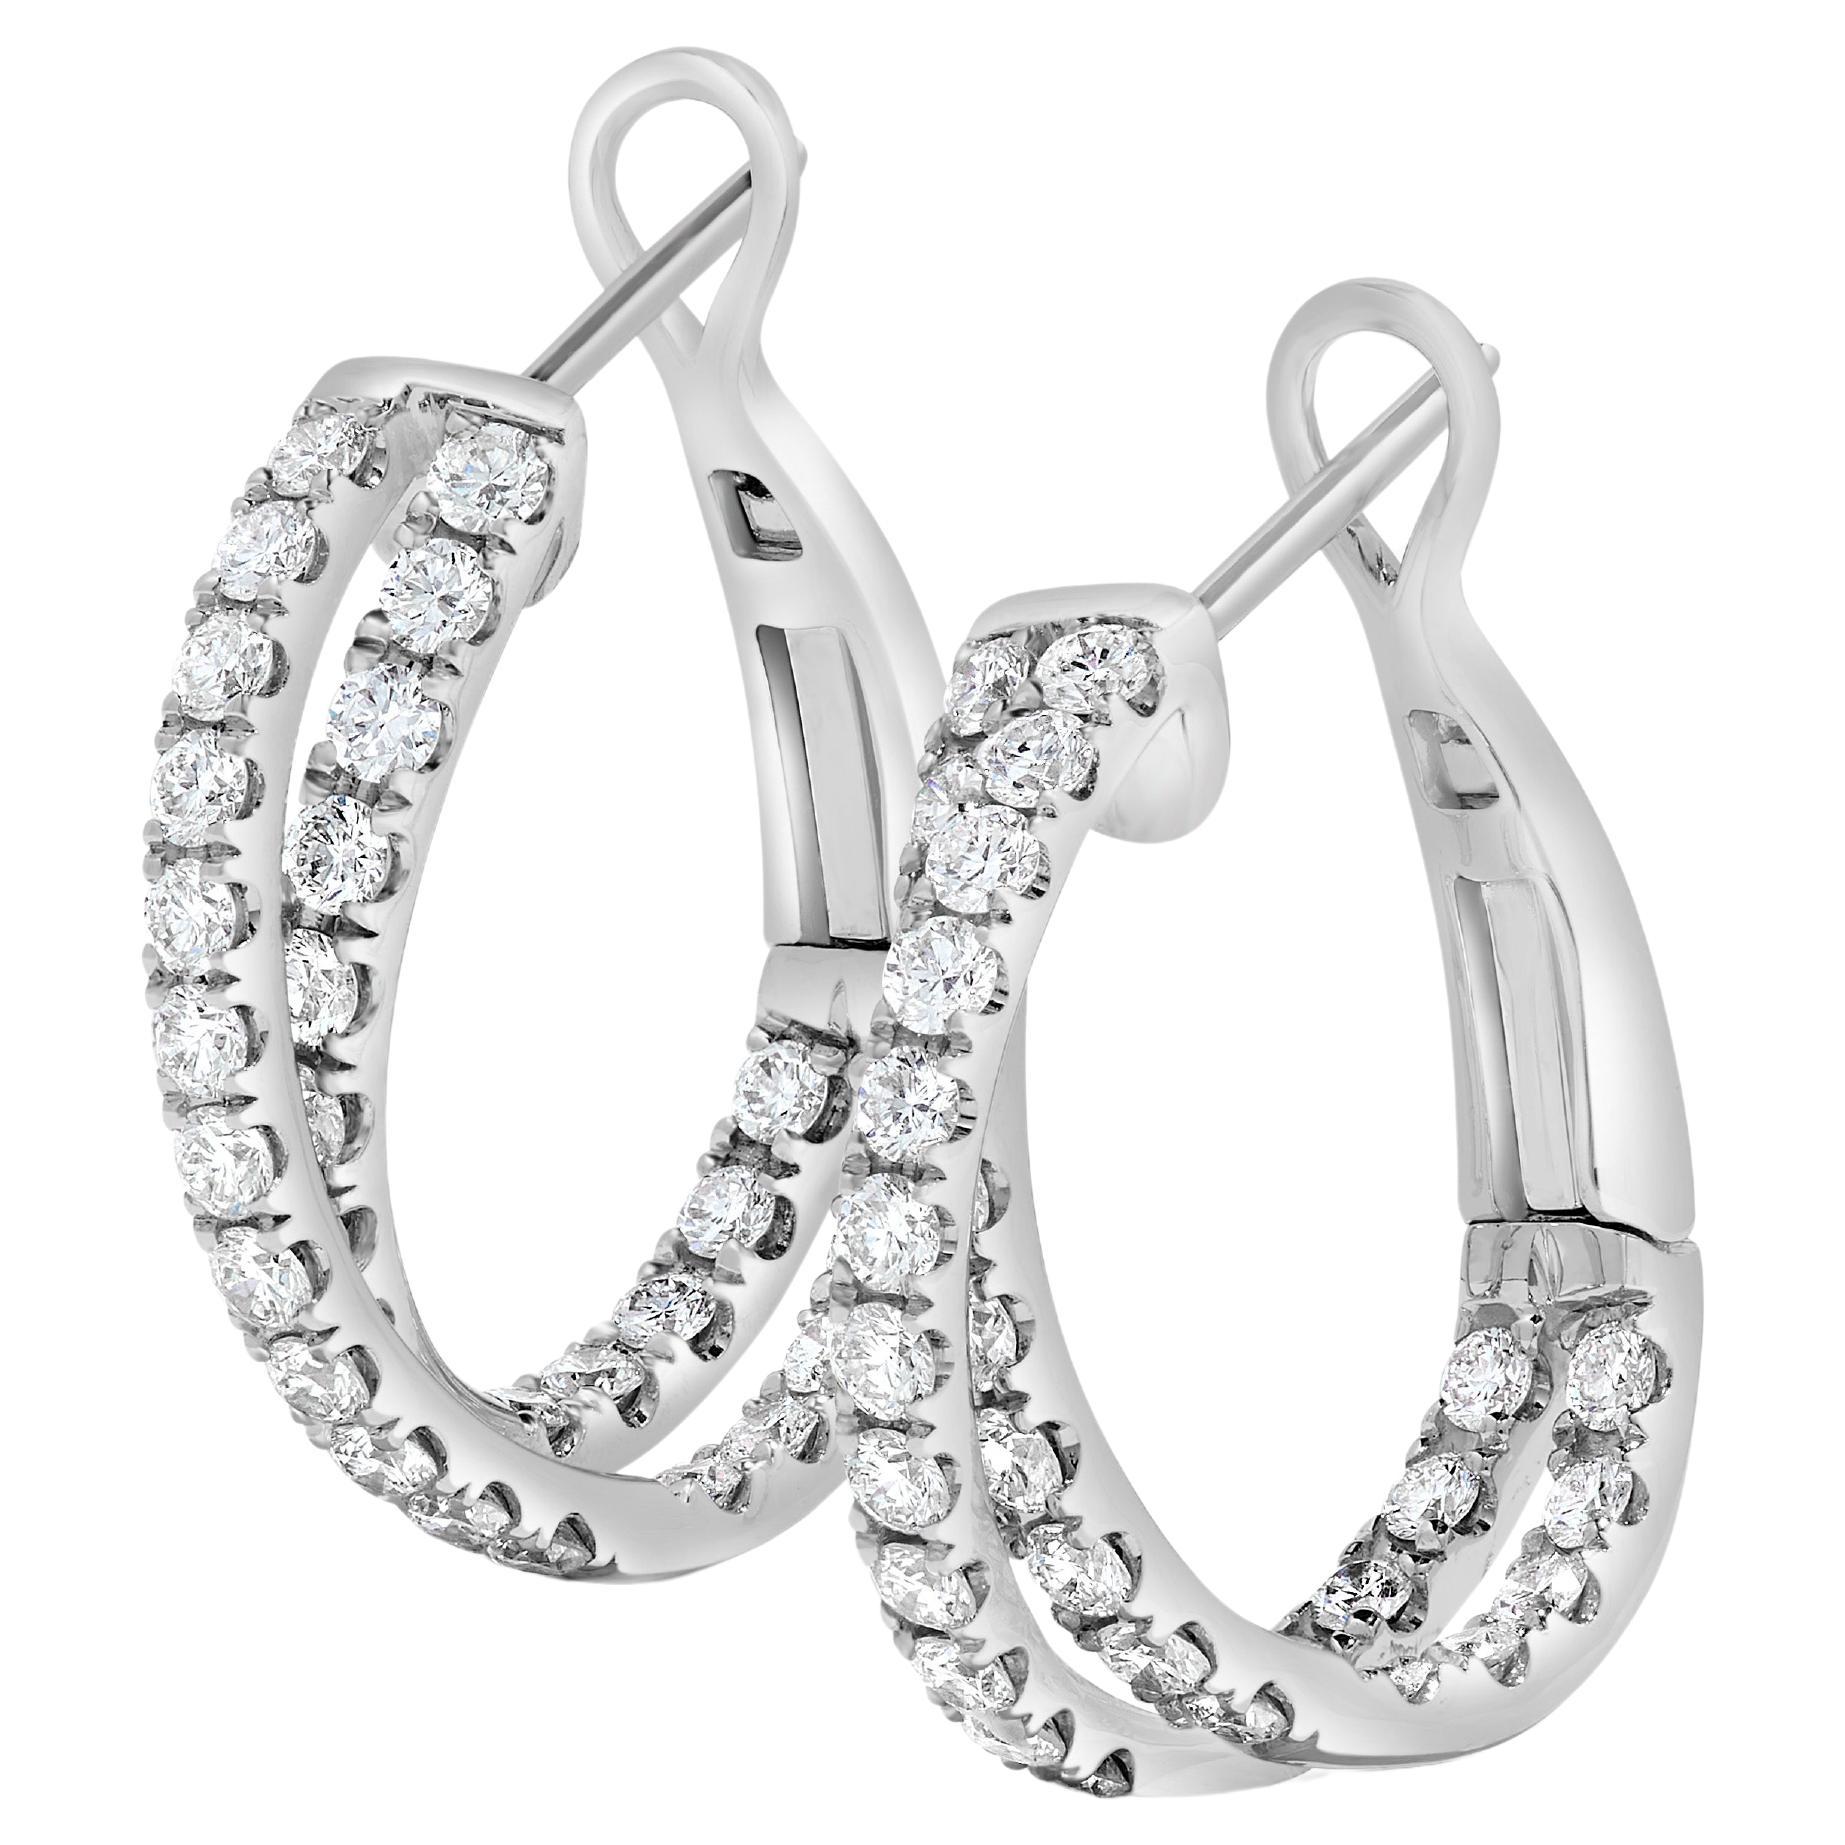 Natural White Round Diamond 1.66 Carat TW White Gold Hoop Earrings For Sale